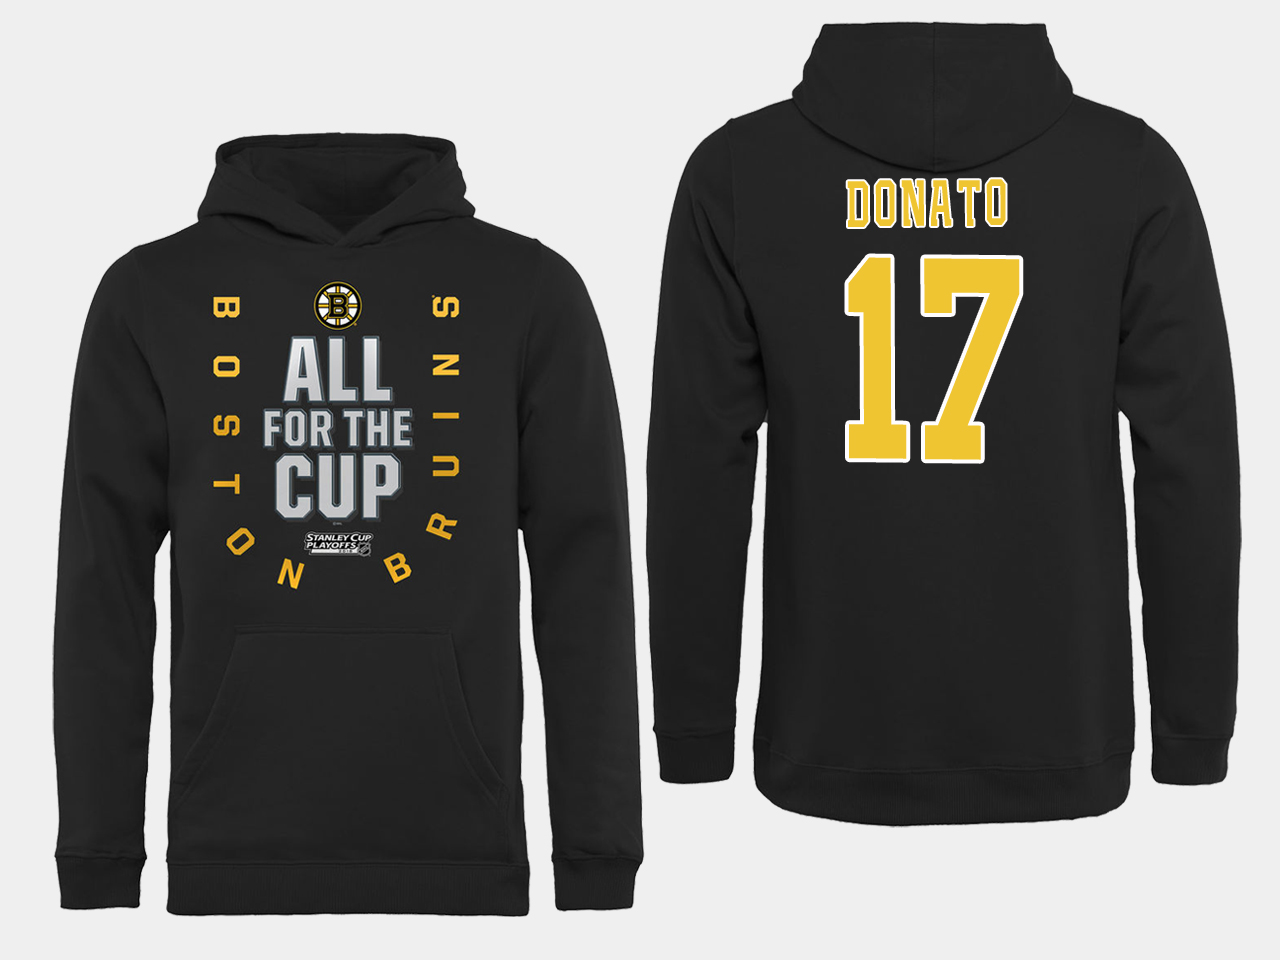 NHL Men Boston Bruins #17 Donato Black All for the Cup Hoodie->boston bruins->NHL Jersey